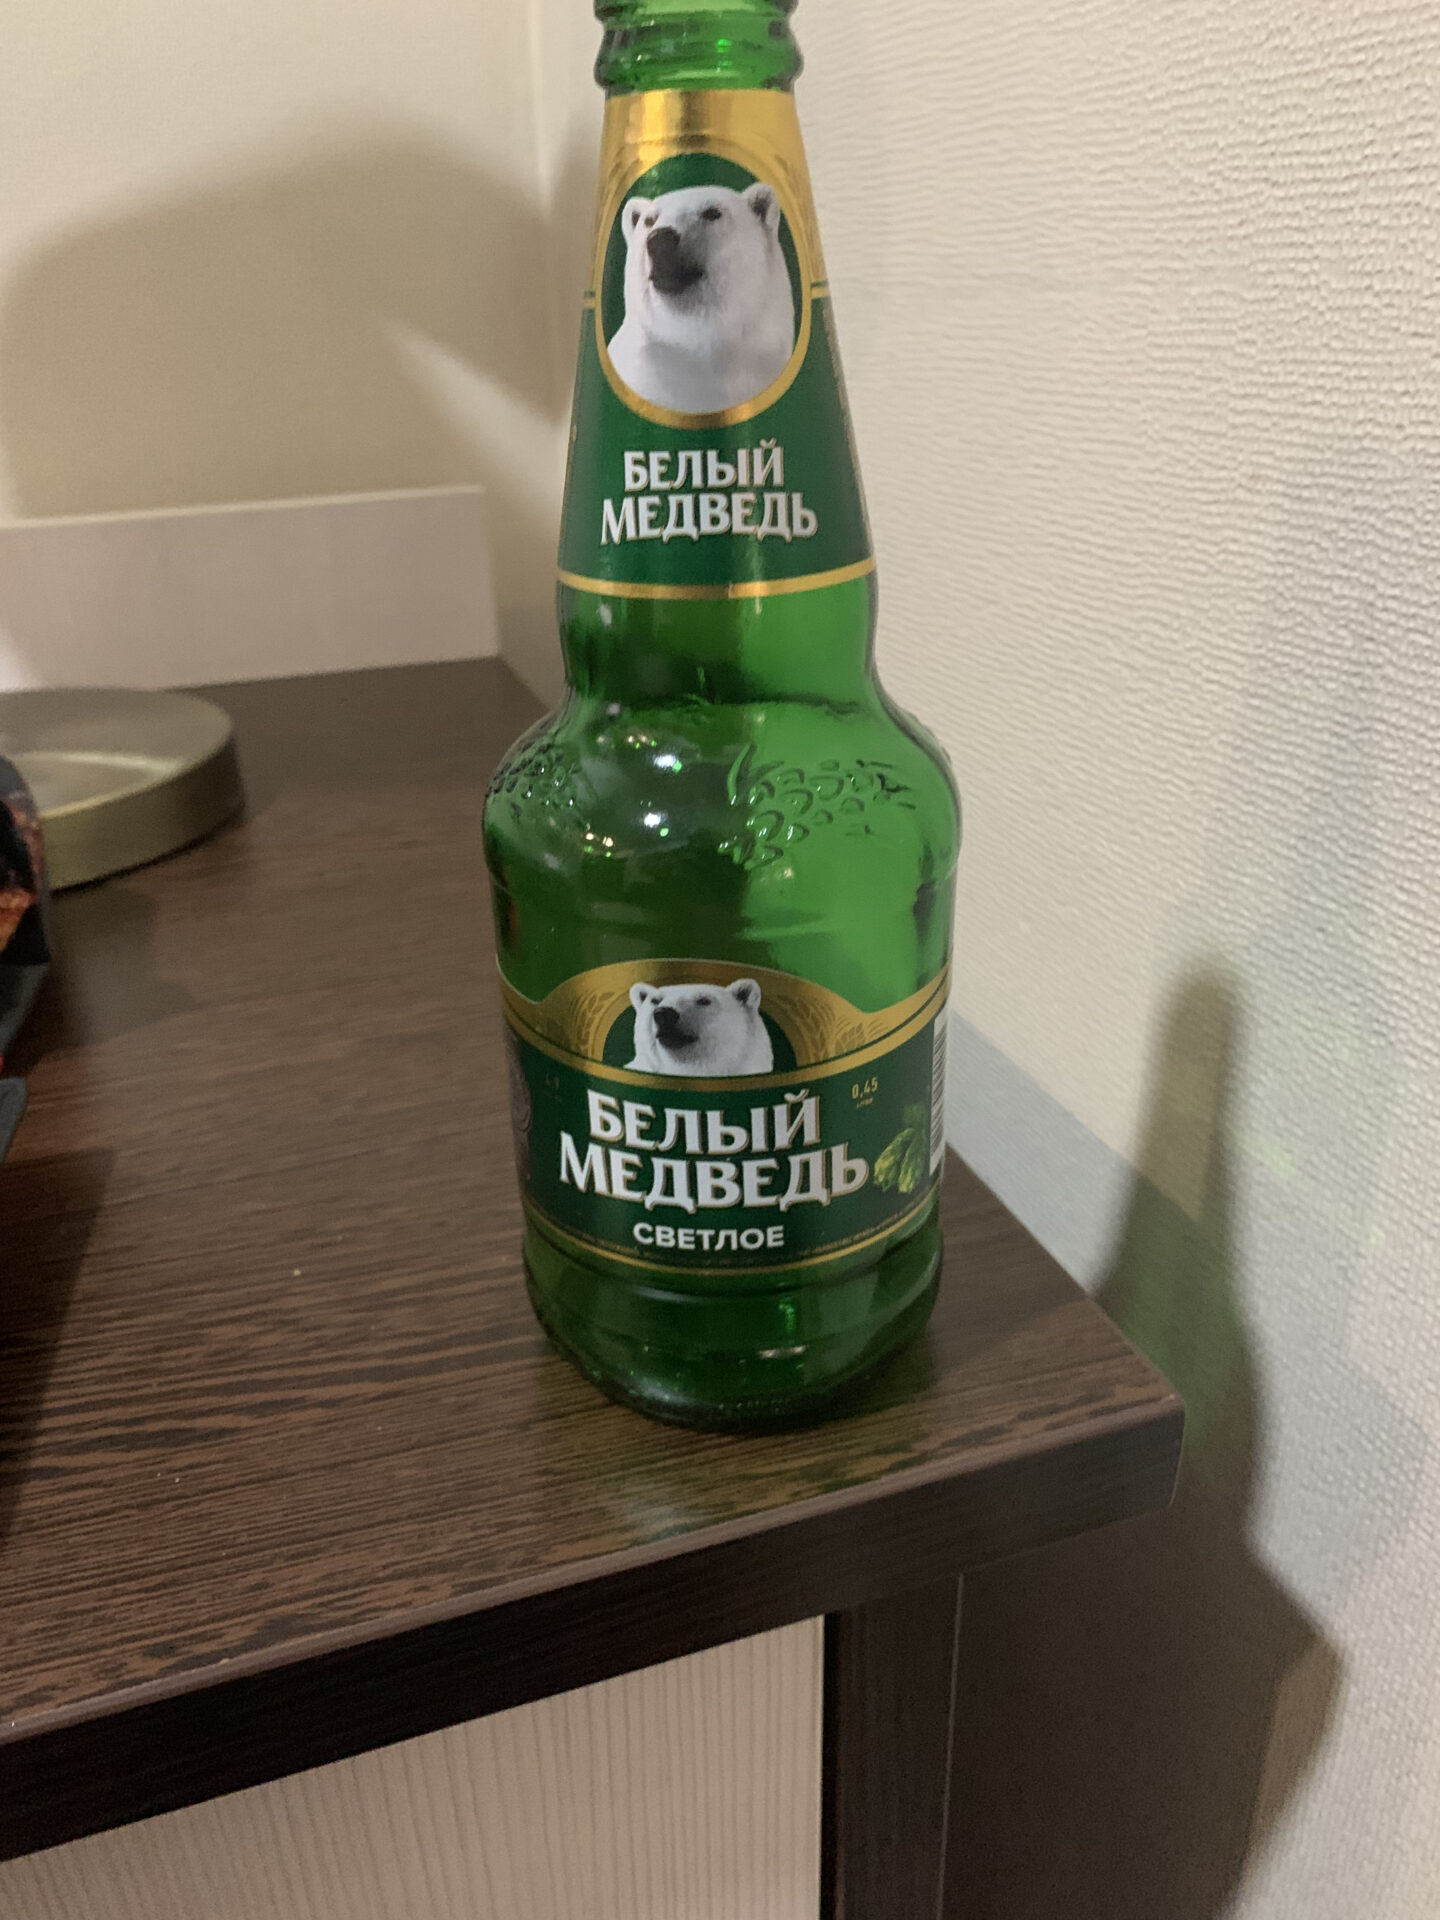 Ukrainian light beer "Bilyi Medved" (White Bear) is standing on a table next to the wall. The bottle is 0.5 liters and is green in color.